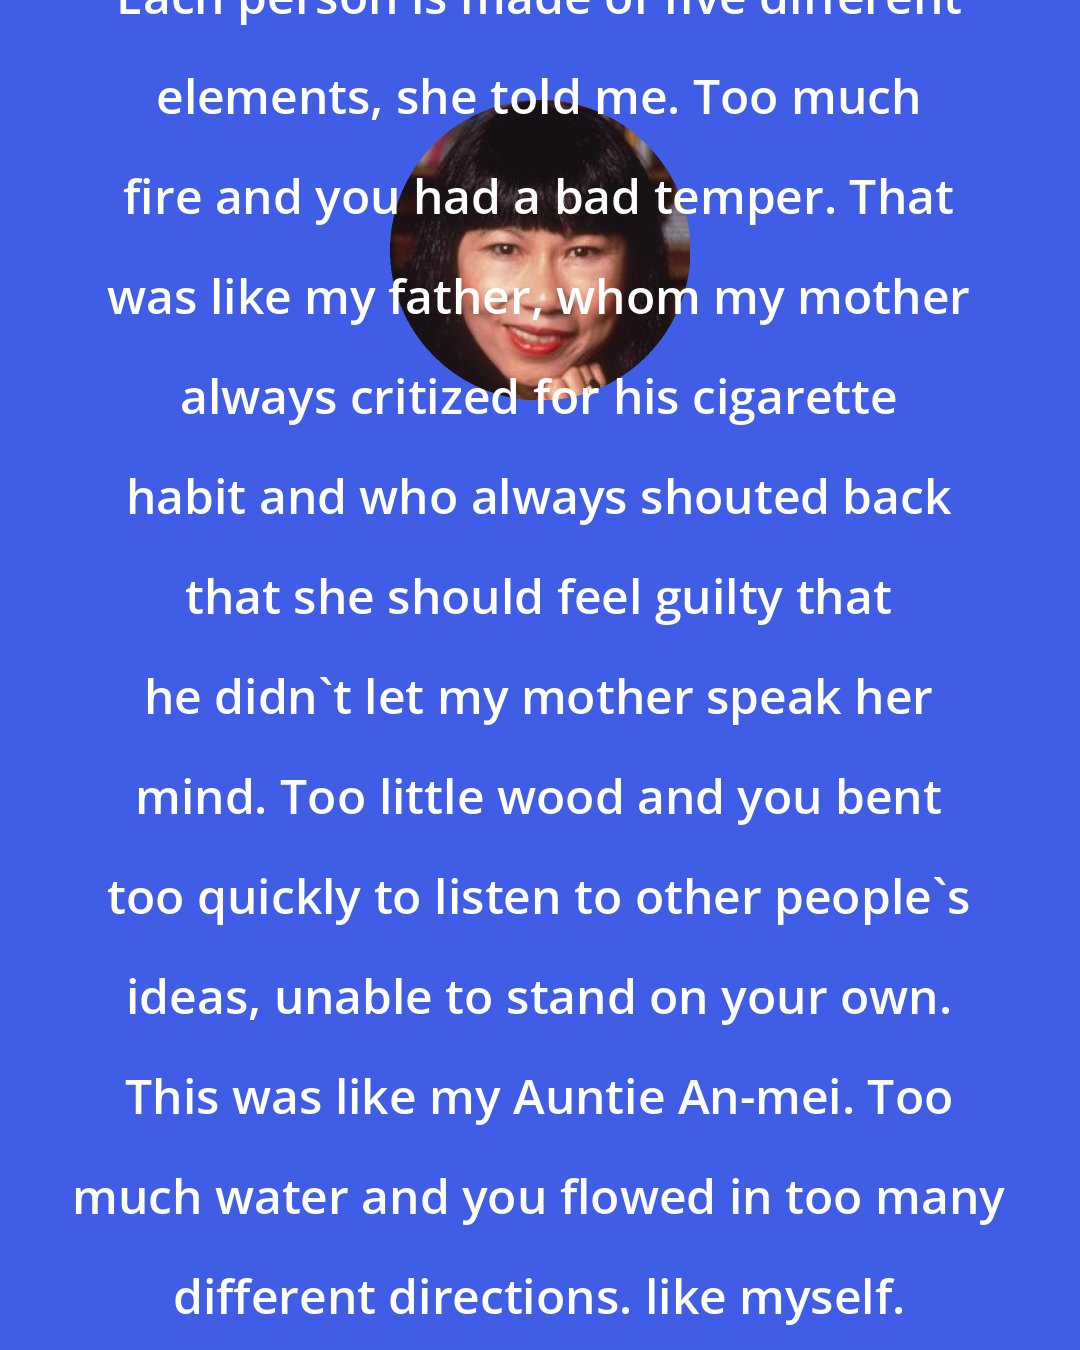 Amy Tan: Each person is made of five different elements, she told me. Too much fire and you had a bad temper. That was like my father, whom my mother always critized for his cigarette habit and who always shouted back that she should feel guilty that he didn't let my mother speak her mind. Too little wood and you bent too quickly to listen to other people's ideas, unable to stand on your own. This was like my Auntie An-mei. Too much water and you flowed in too many different directions. like myself.